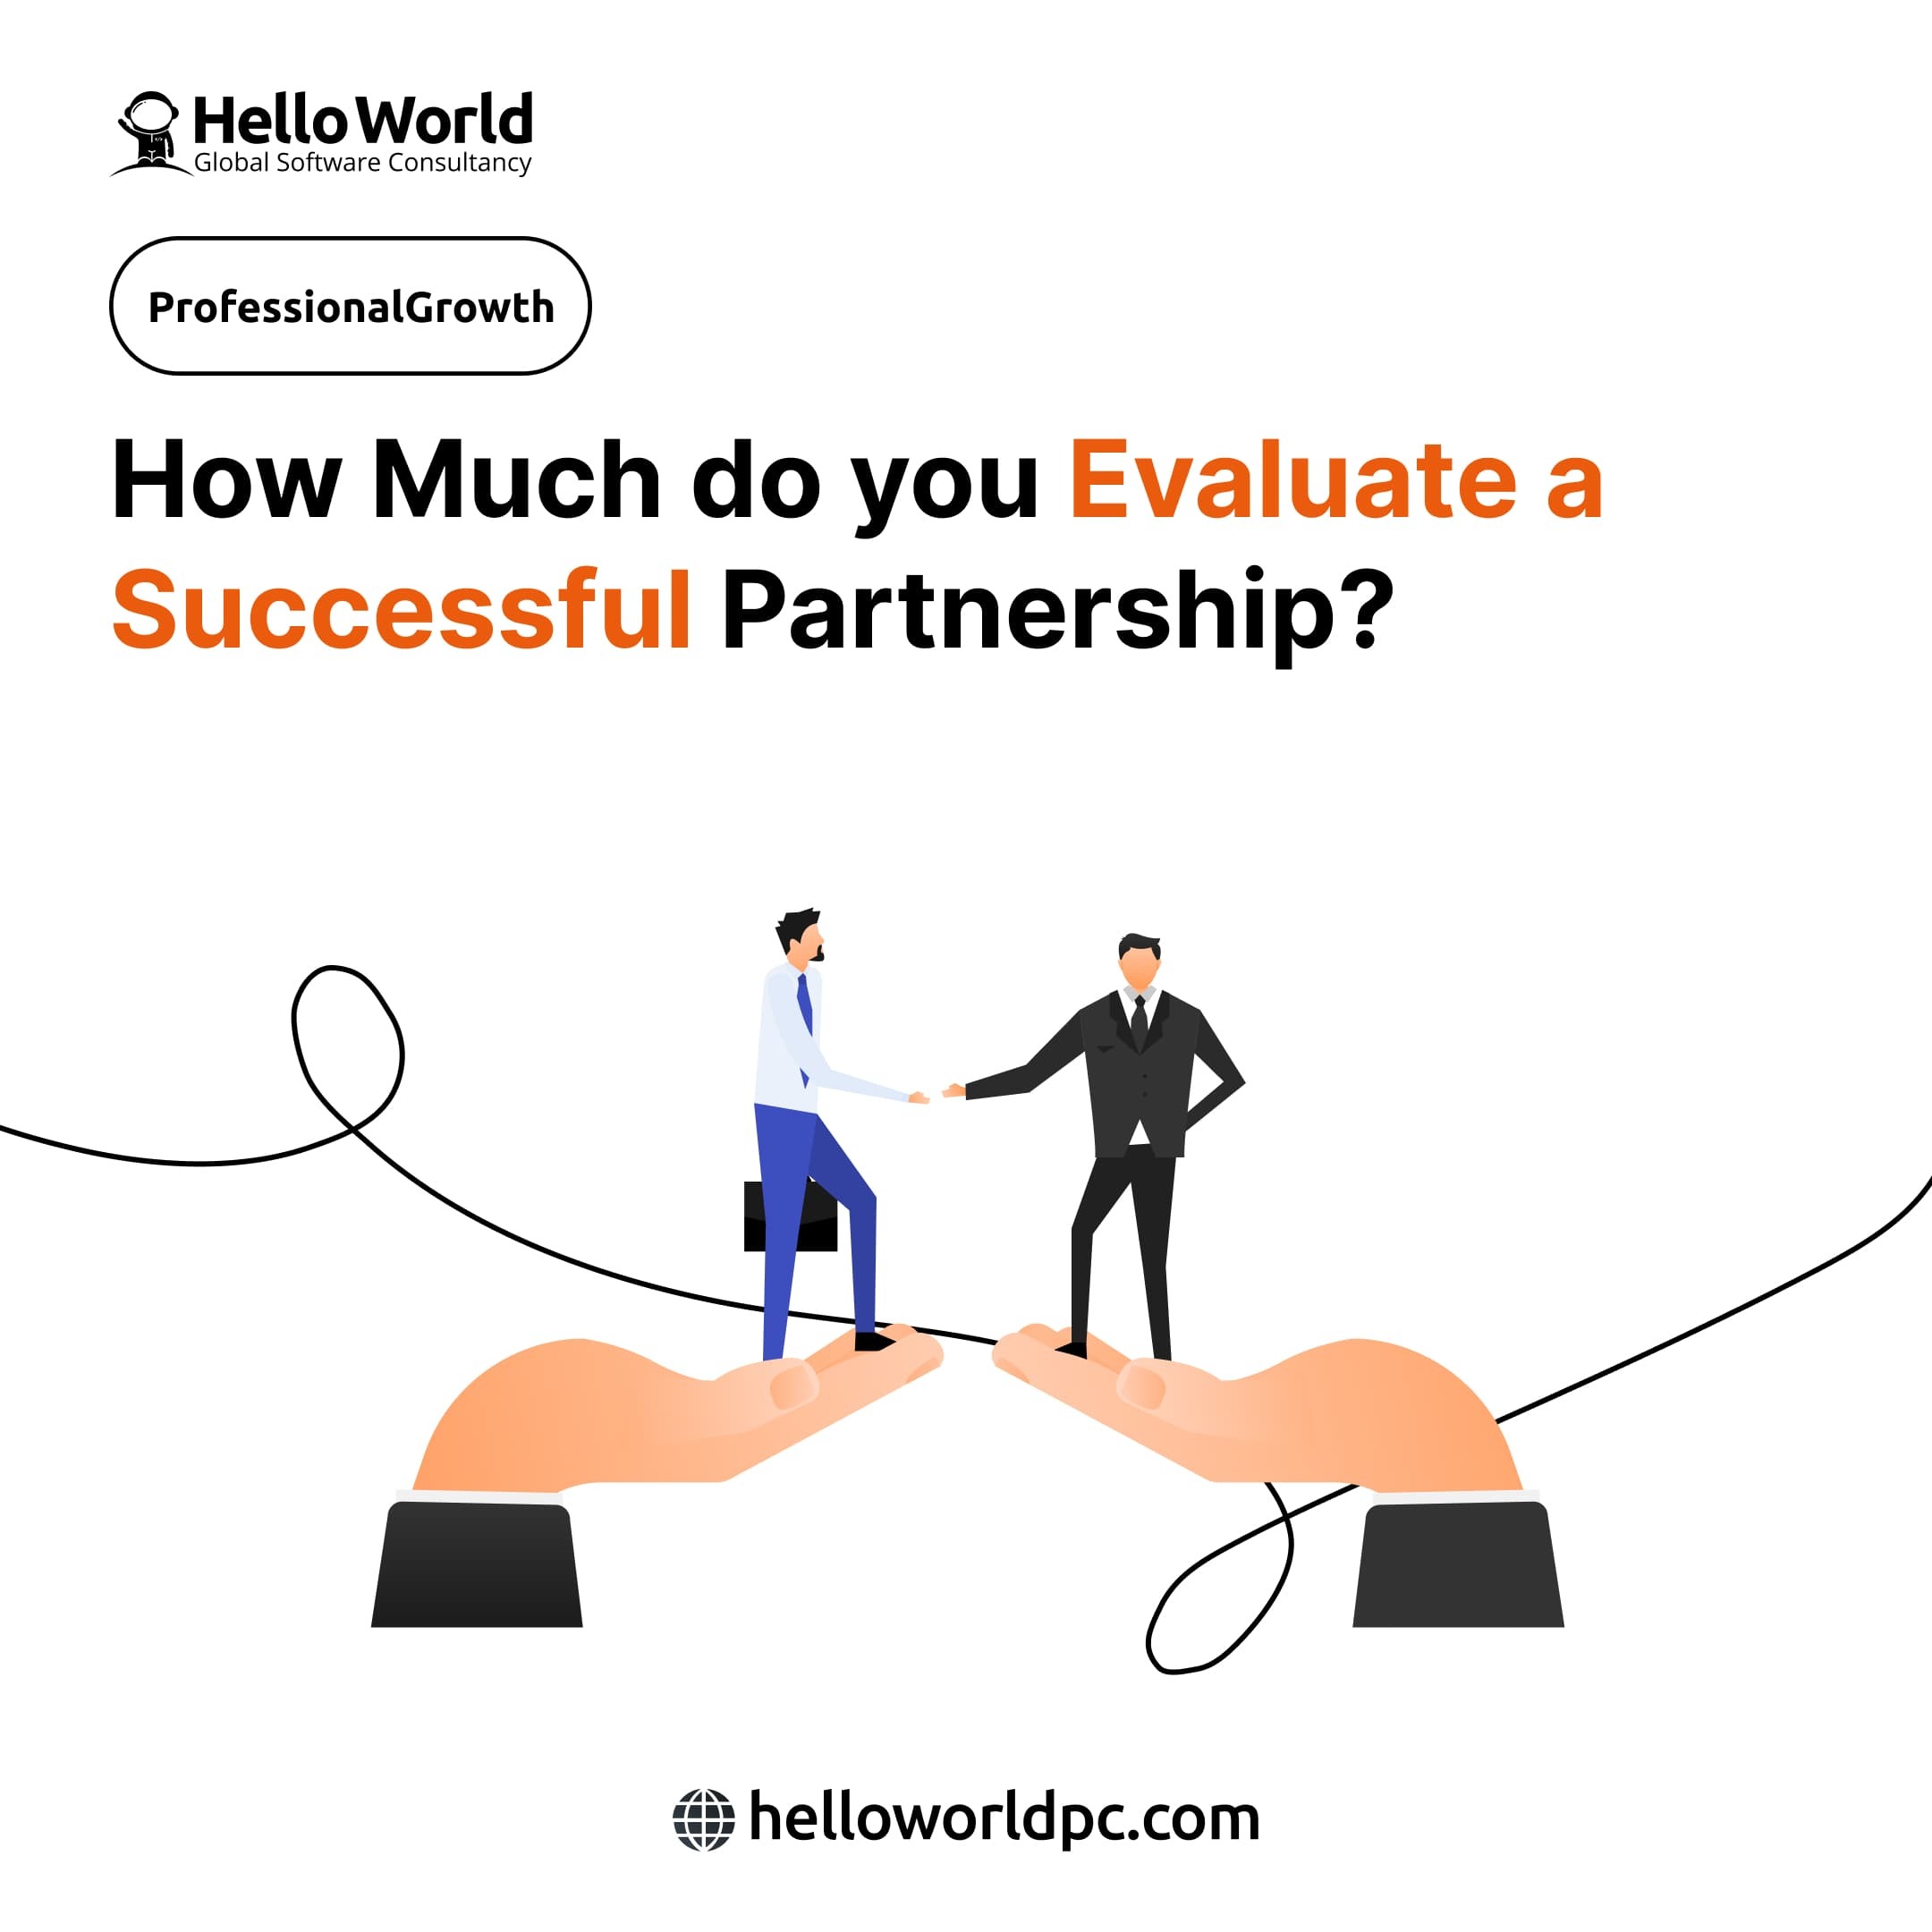 How much do you evaluate a successful partnership?